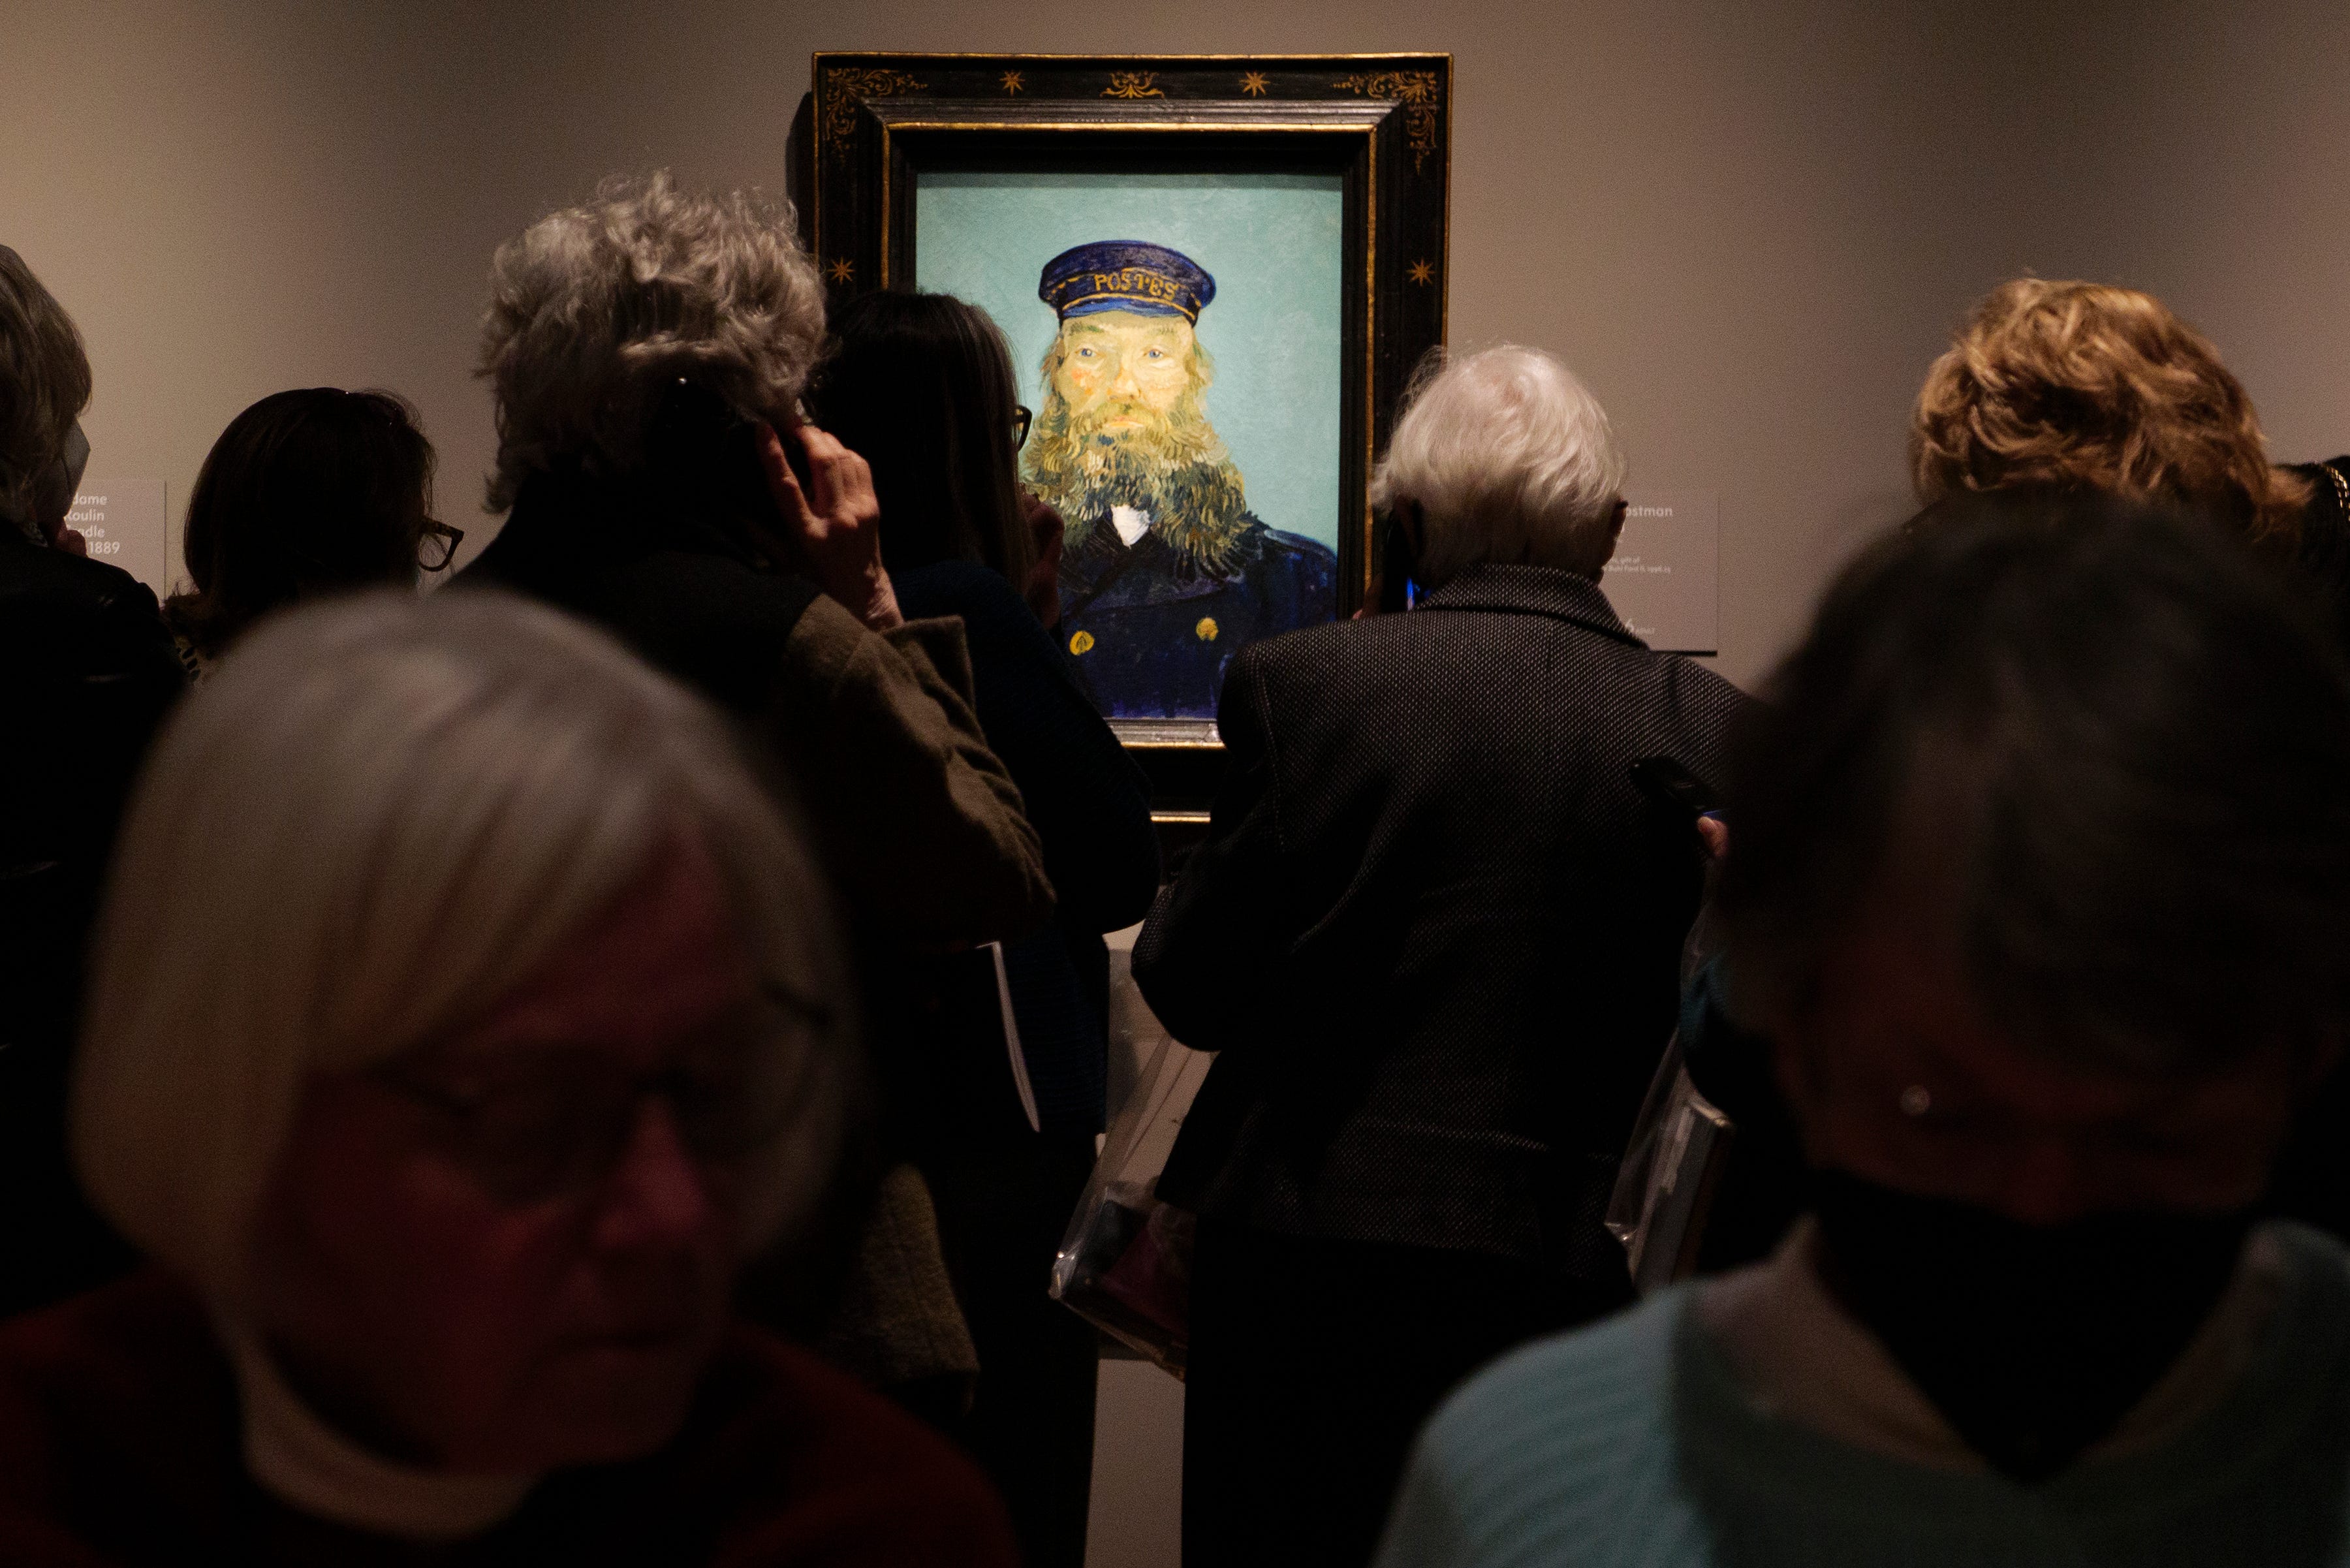 Visitors crowd around Portrait of Postman Roulin, 1888, at the Van Gogh in America exhibit at the Detroit institute of Arts, Wednesday, Jan. 11, 2023.